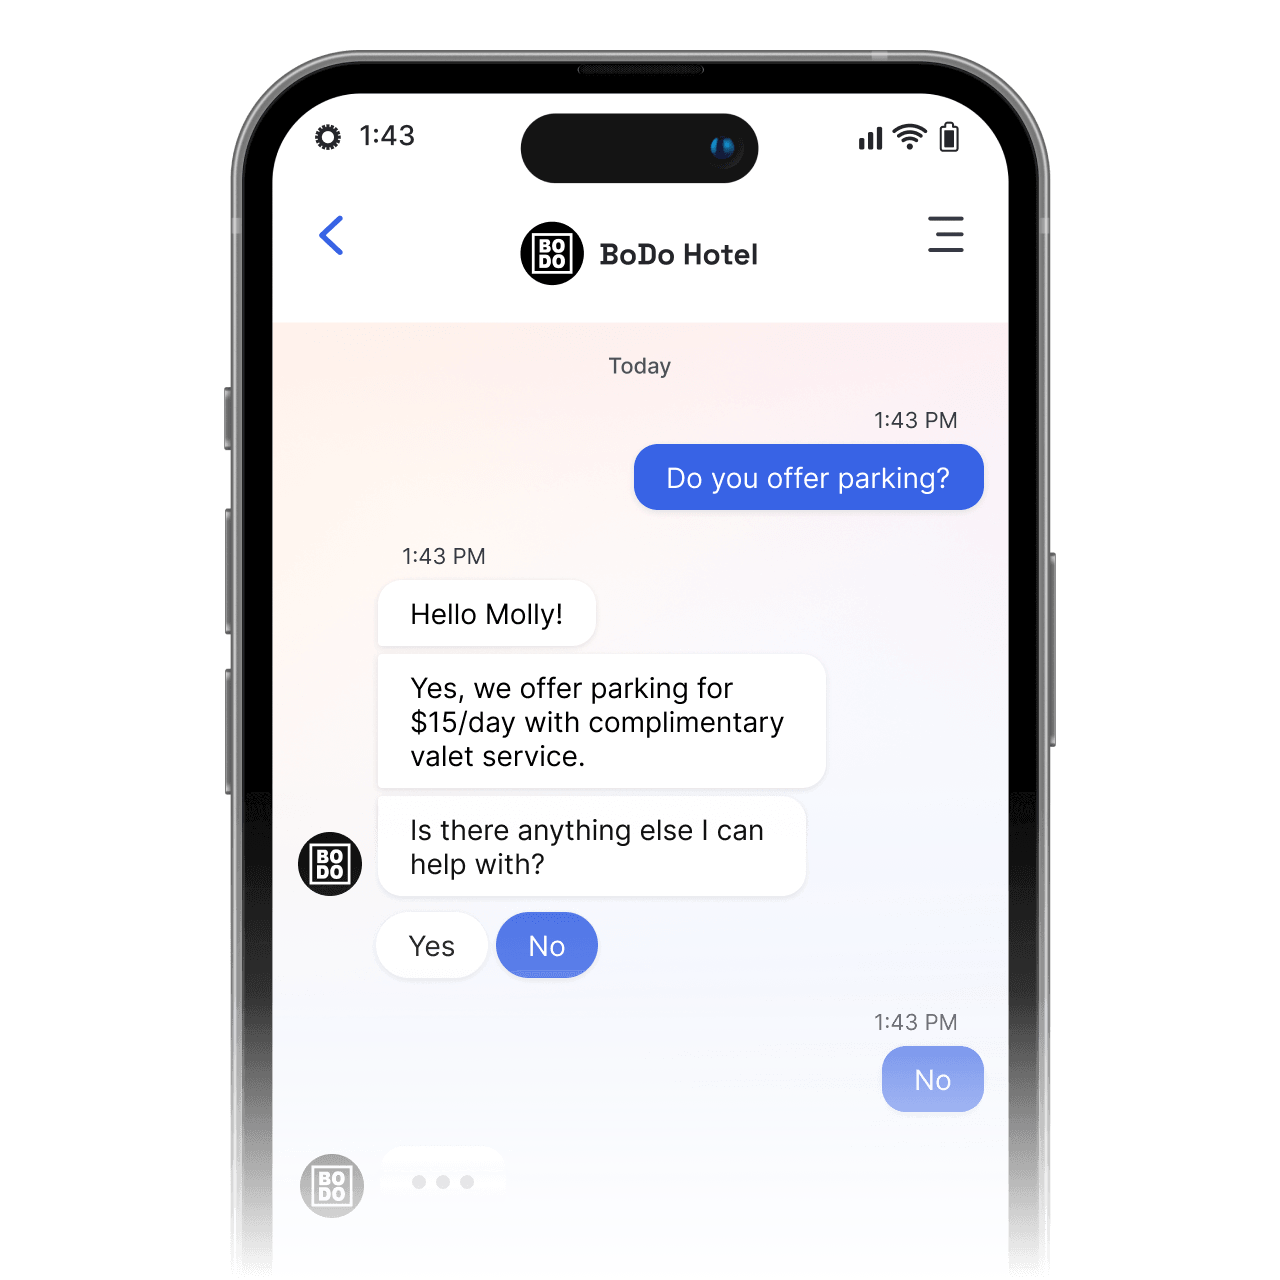 example of how conversational design can improve the guest experience with artificial intelligence